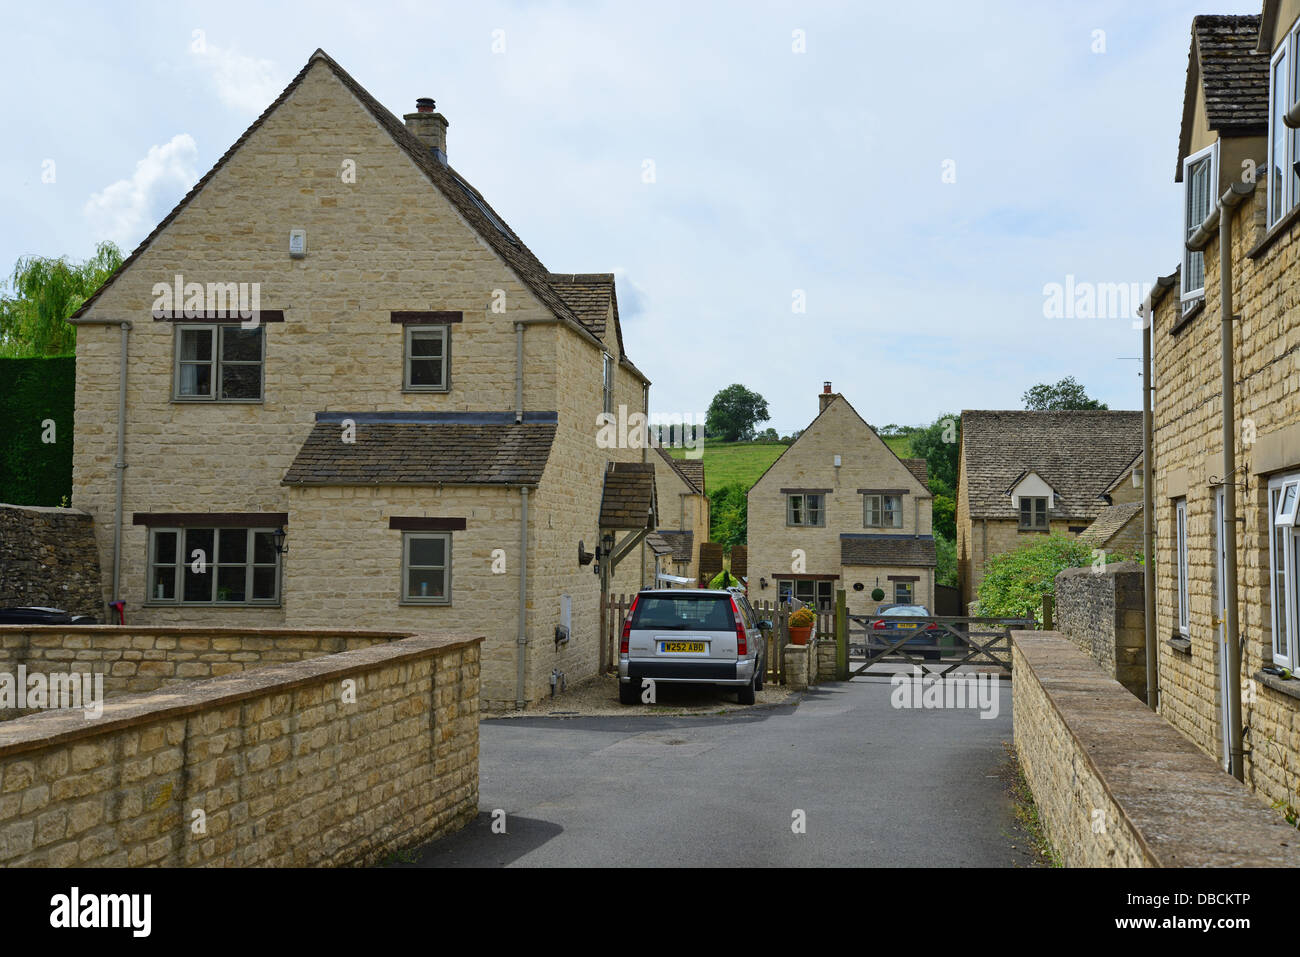 Meadow Court Housing Estate, Northleach (Cotswolds), Gloucestershire, Angleterre, Royaume-Uni Banque D'Images